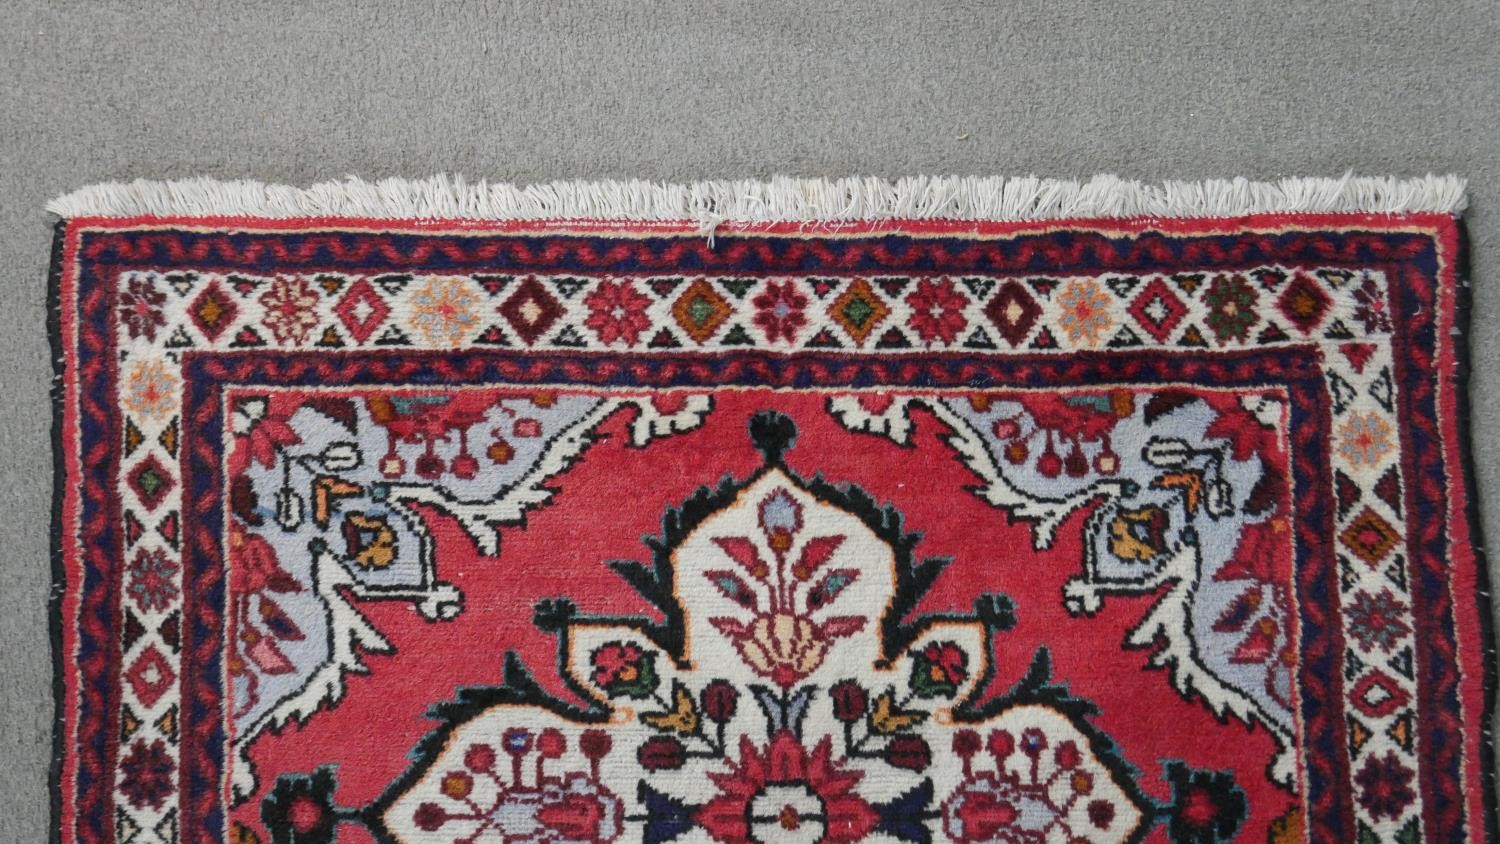 A handmade Persian Hamadan rug with repeating floral motifs across the madder ground within - Image 6 of 7